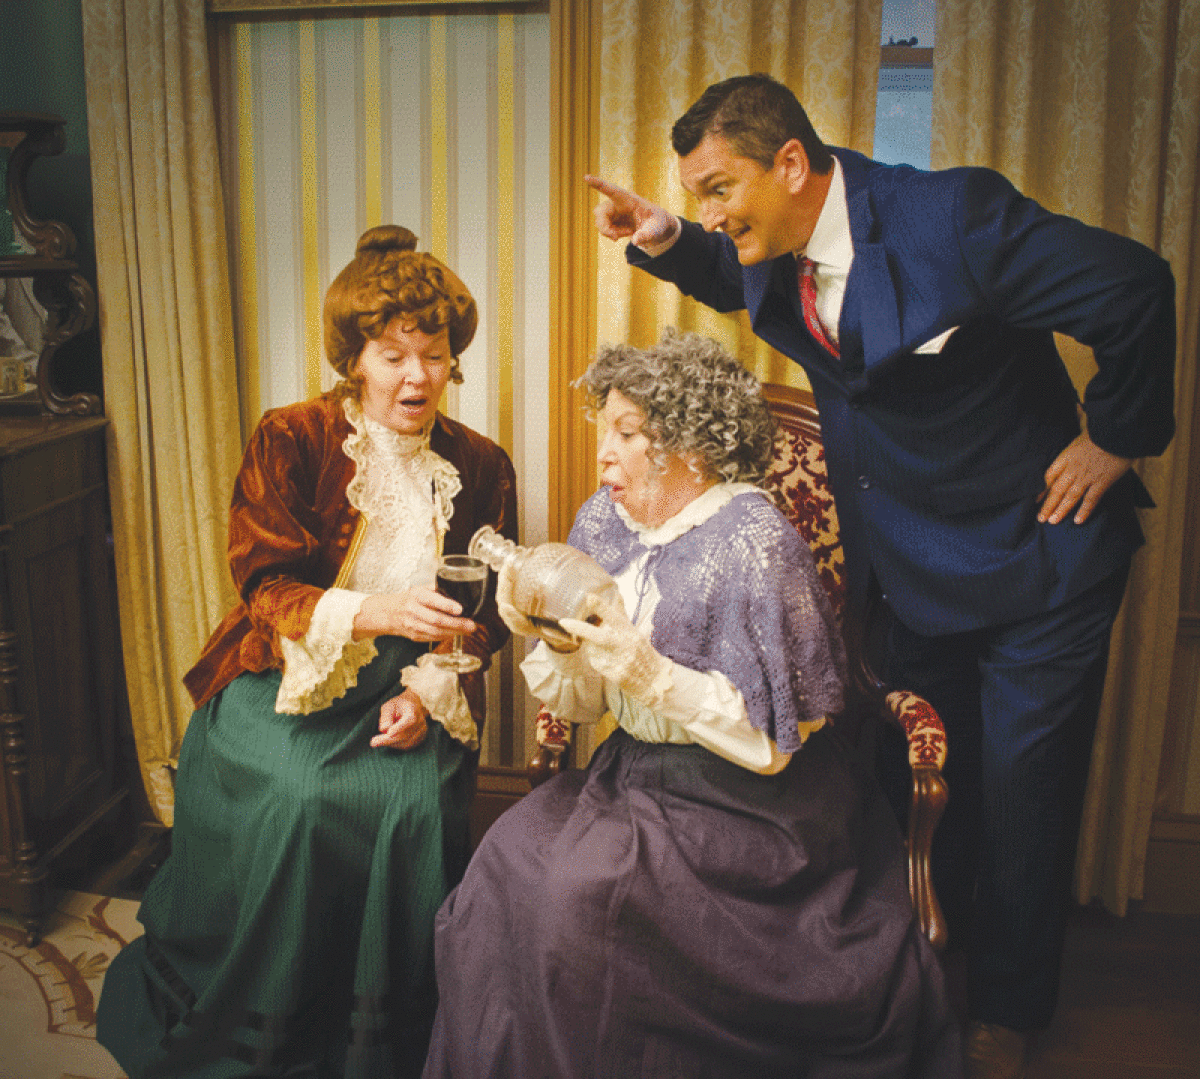  The Village Players are opening their 100th season with a production of “Arsenic and Old Lace.” 